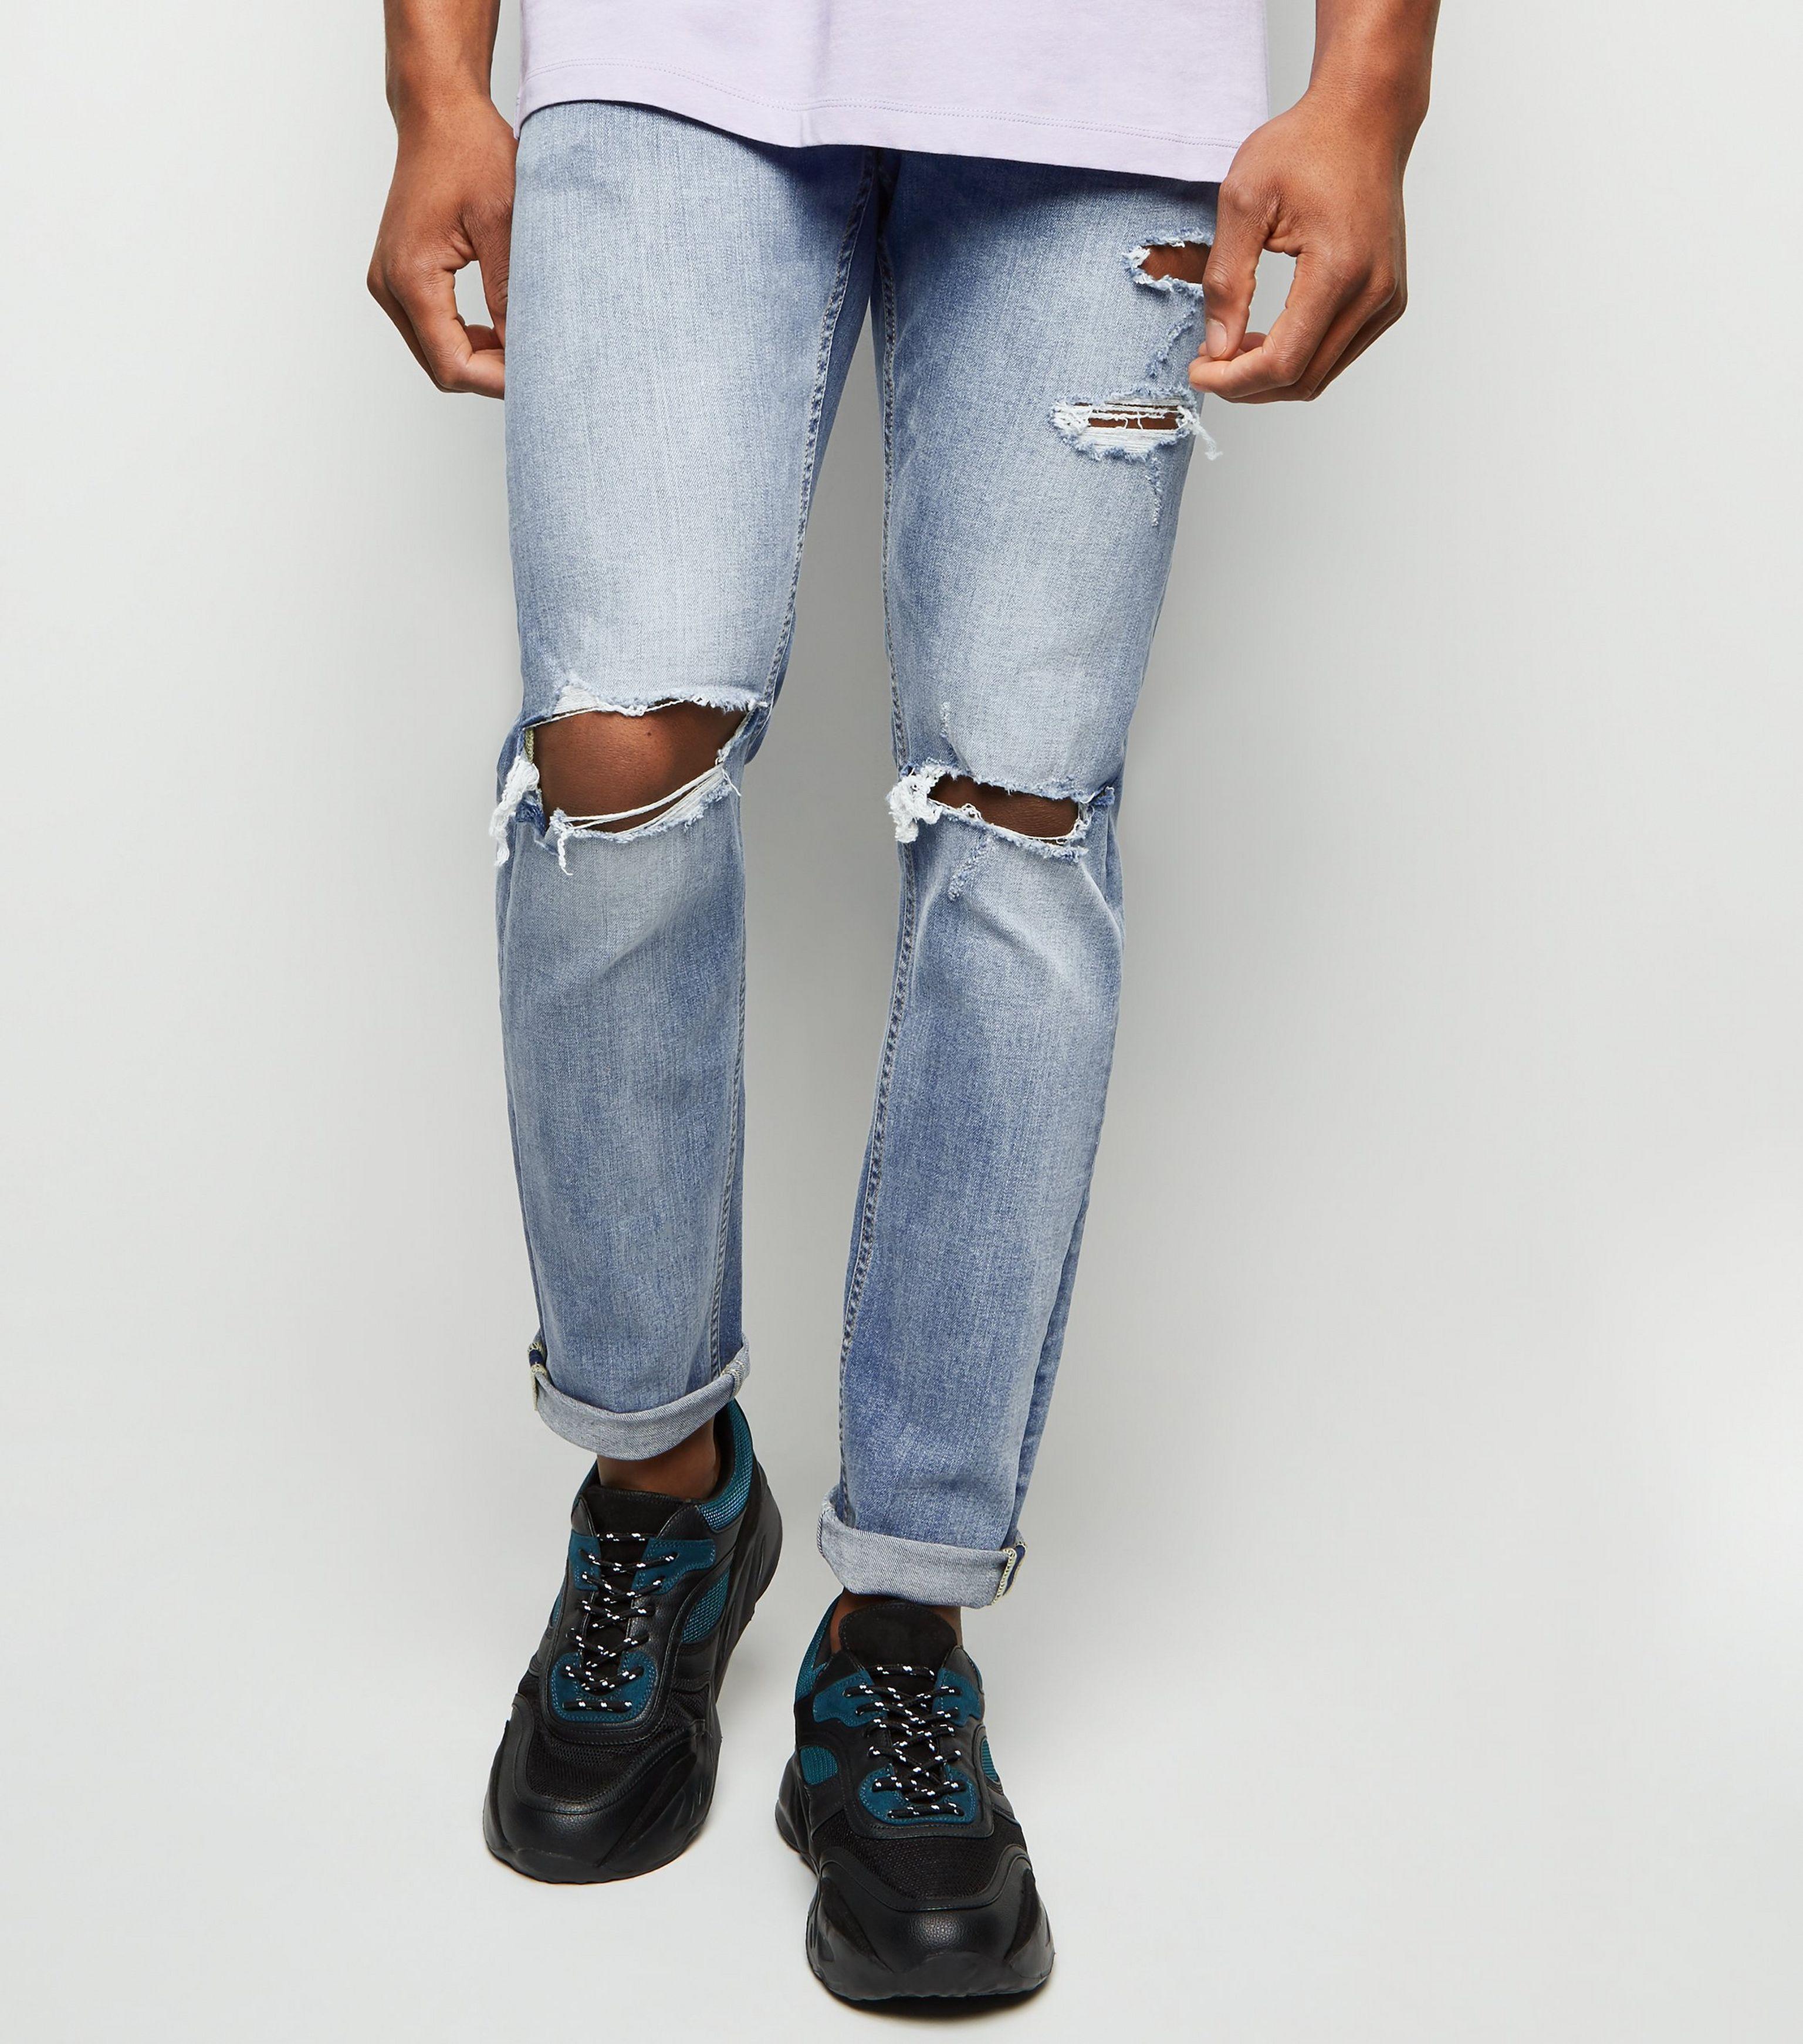 New Look Denim Blue Washed Skinny Stretch Ripped Knee Jeans for Men - Lyst